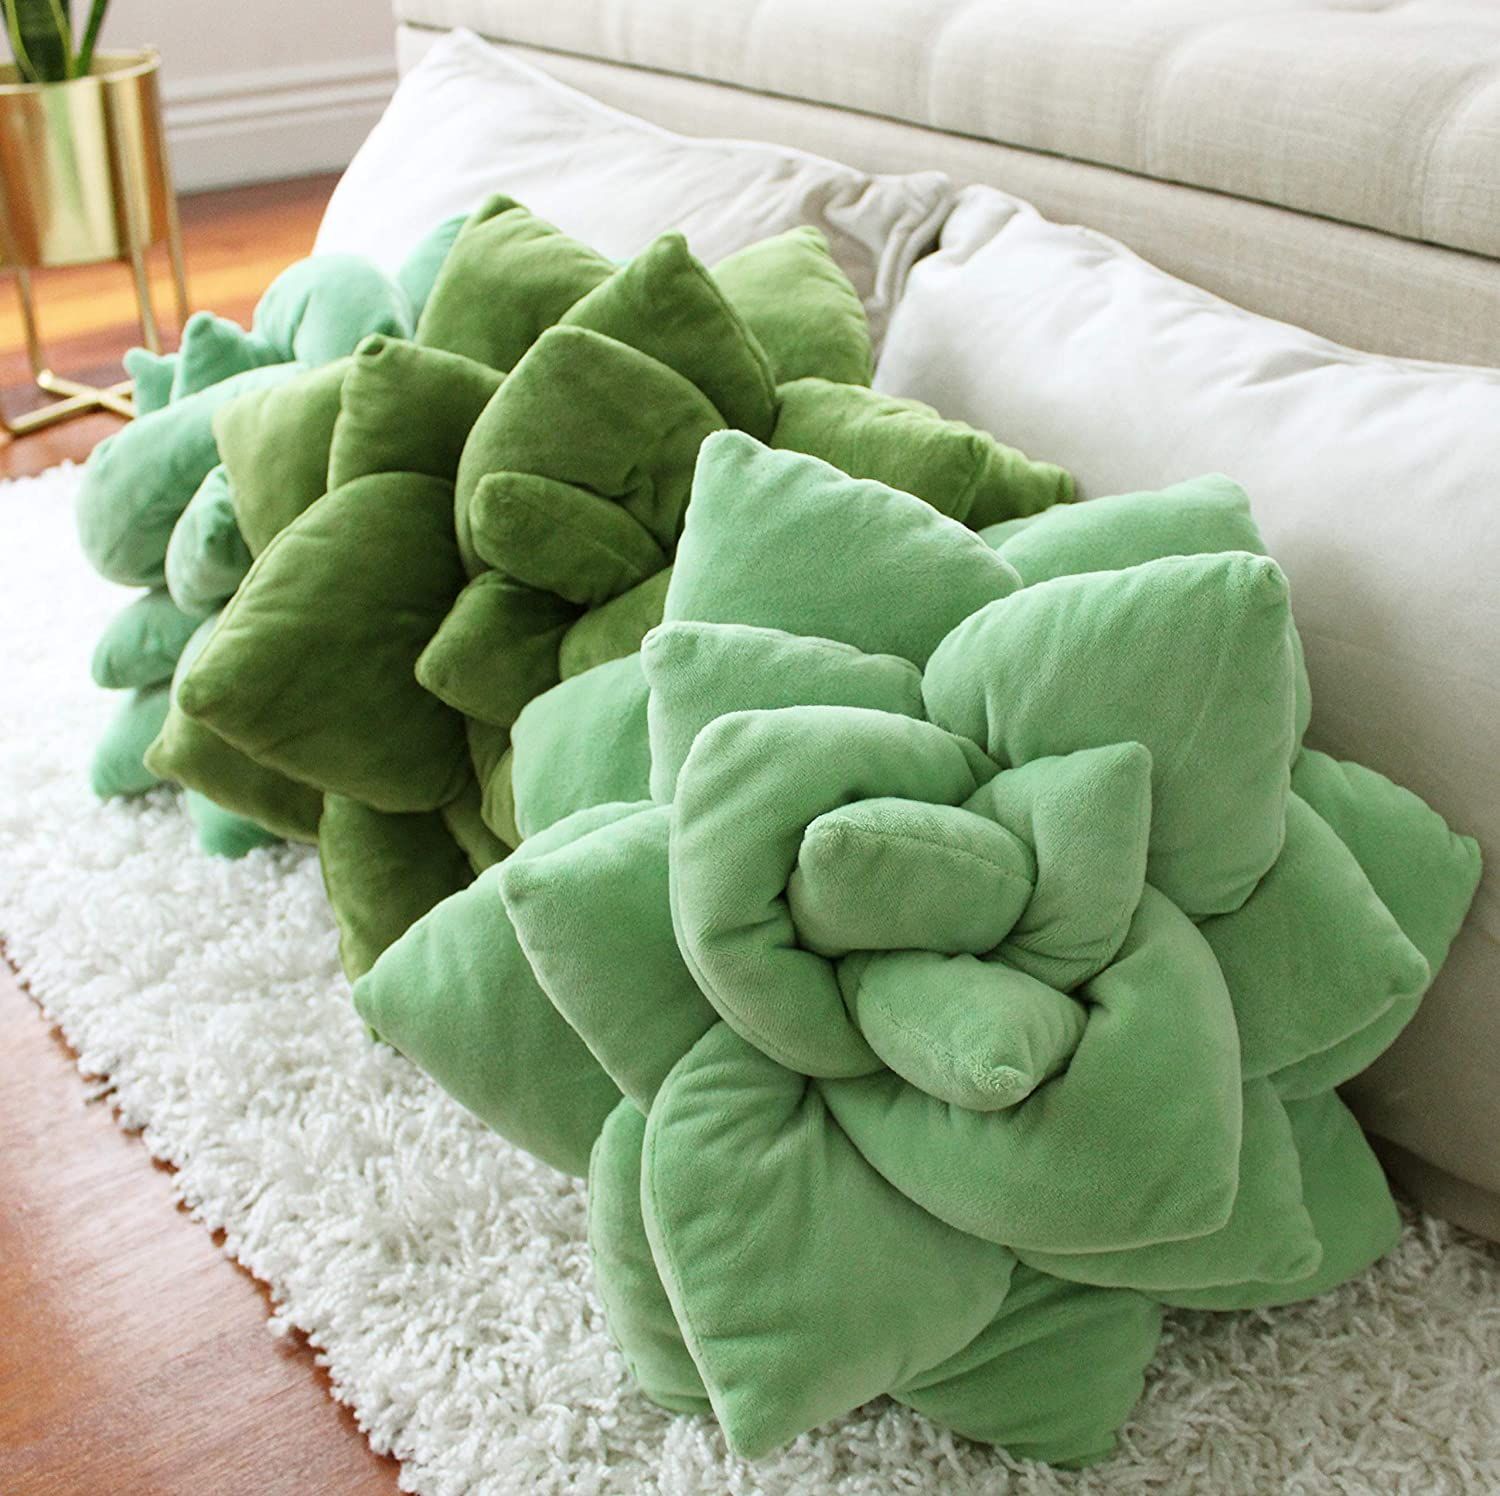 Plush Comfort: Elevating Your Space with Decorative Pillows